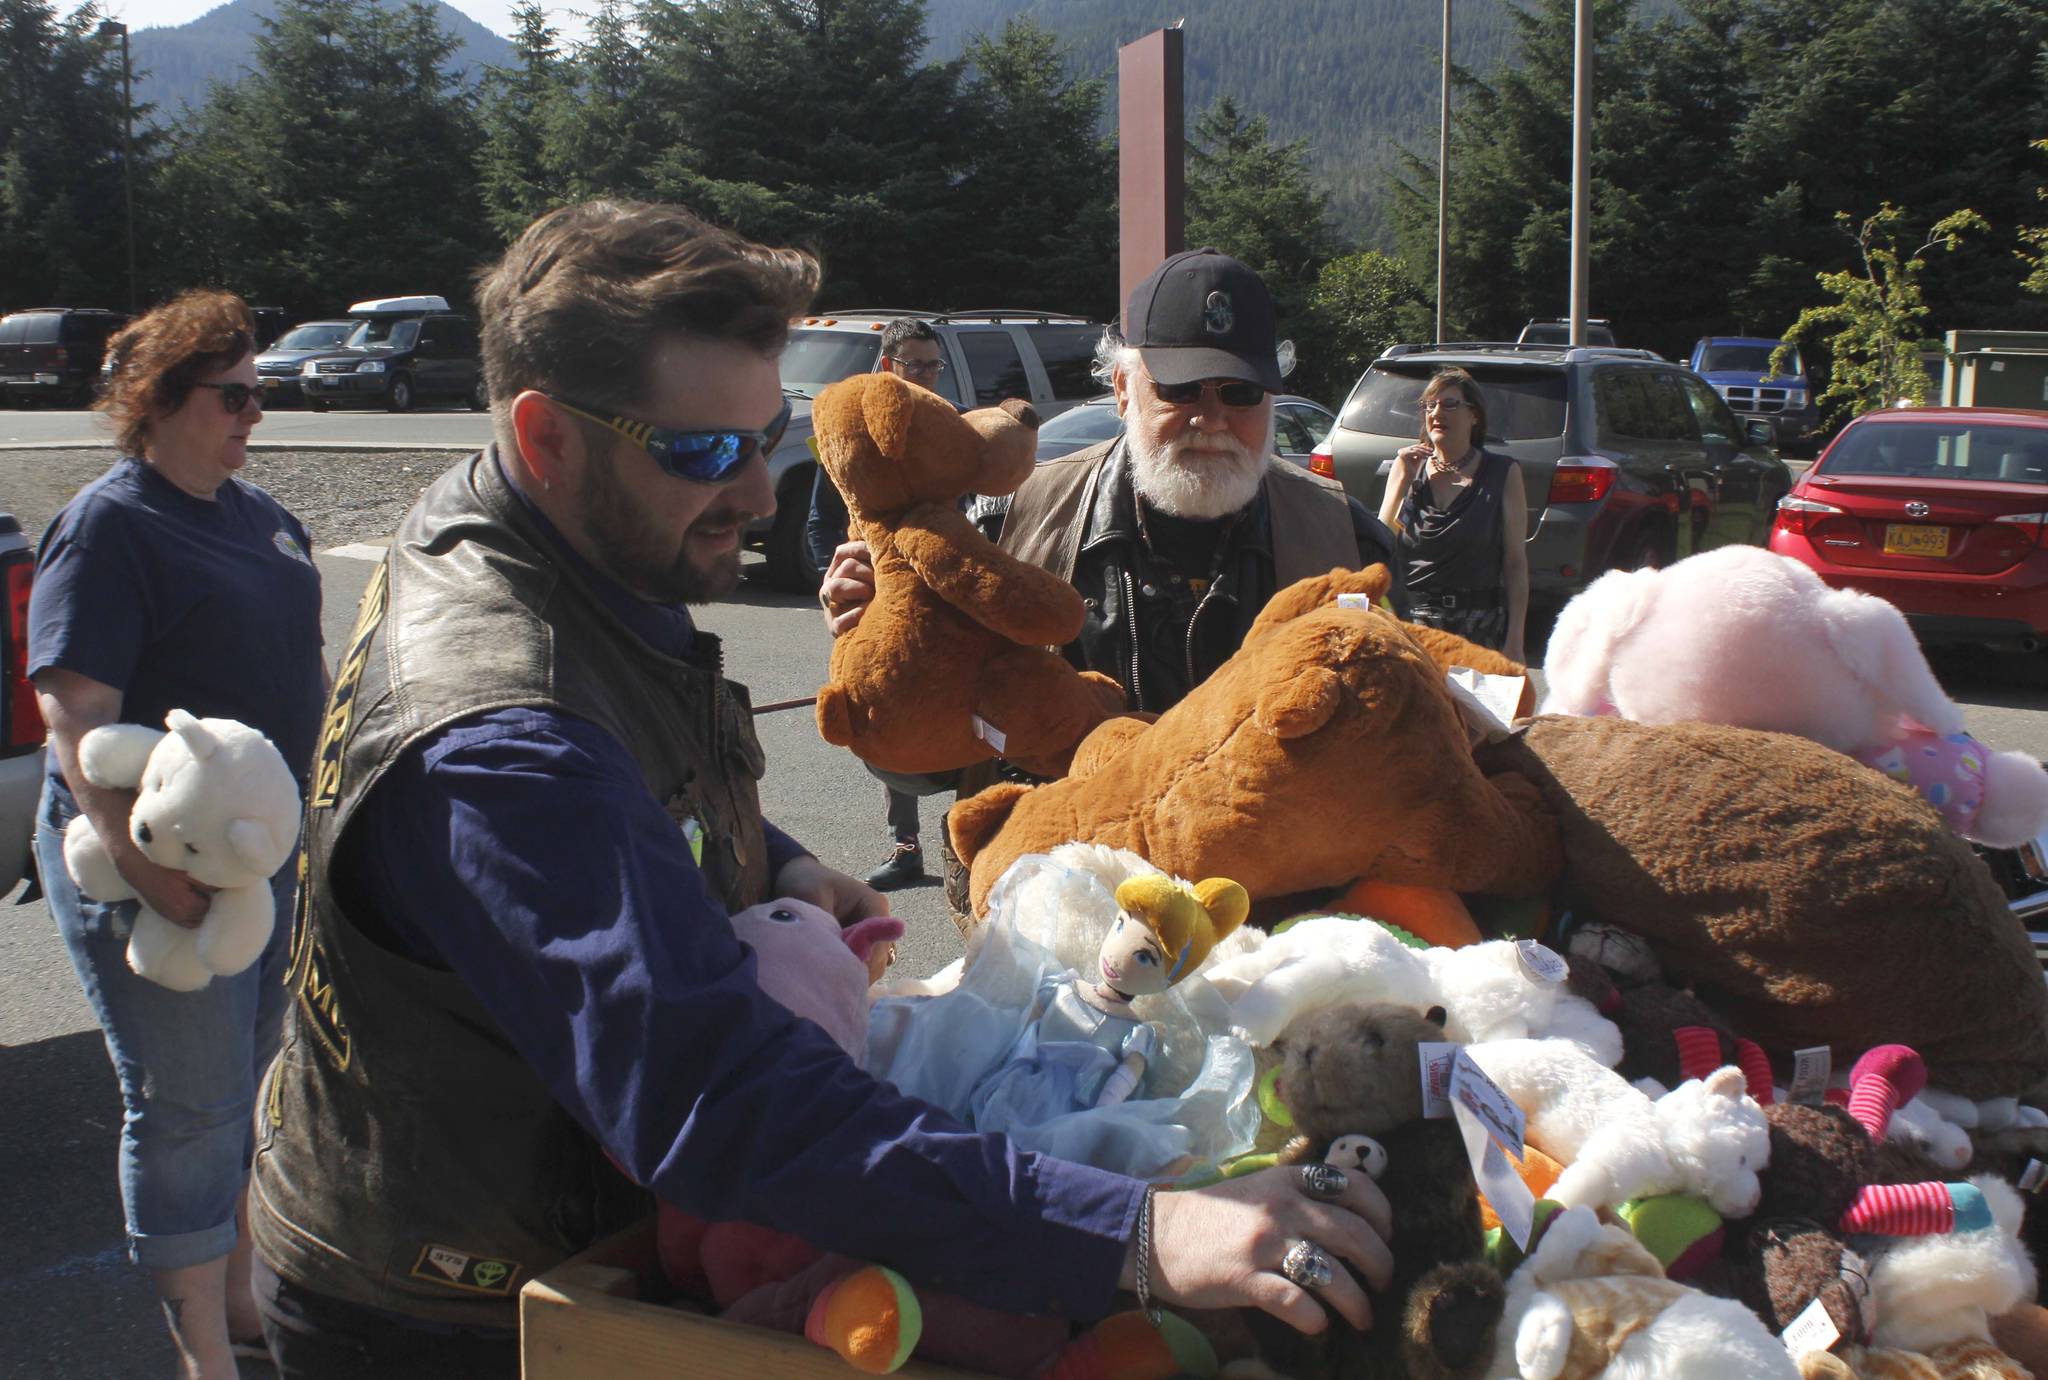 PHOTOS BY ALEX McCARTHY | JUNEAU EMPIRE Justin Papenbrock, a sergeant-at-arms for the Southeast Alaska Panhandlers Motorcycle Club, places a stuffed animal on a pile of donated toys on Thursday. The club brought 10 large trash bags of stuffed animals, raised at the 23rd annual Toy Run, to Bartlett Regional Hospital.